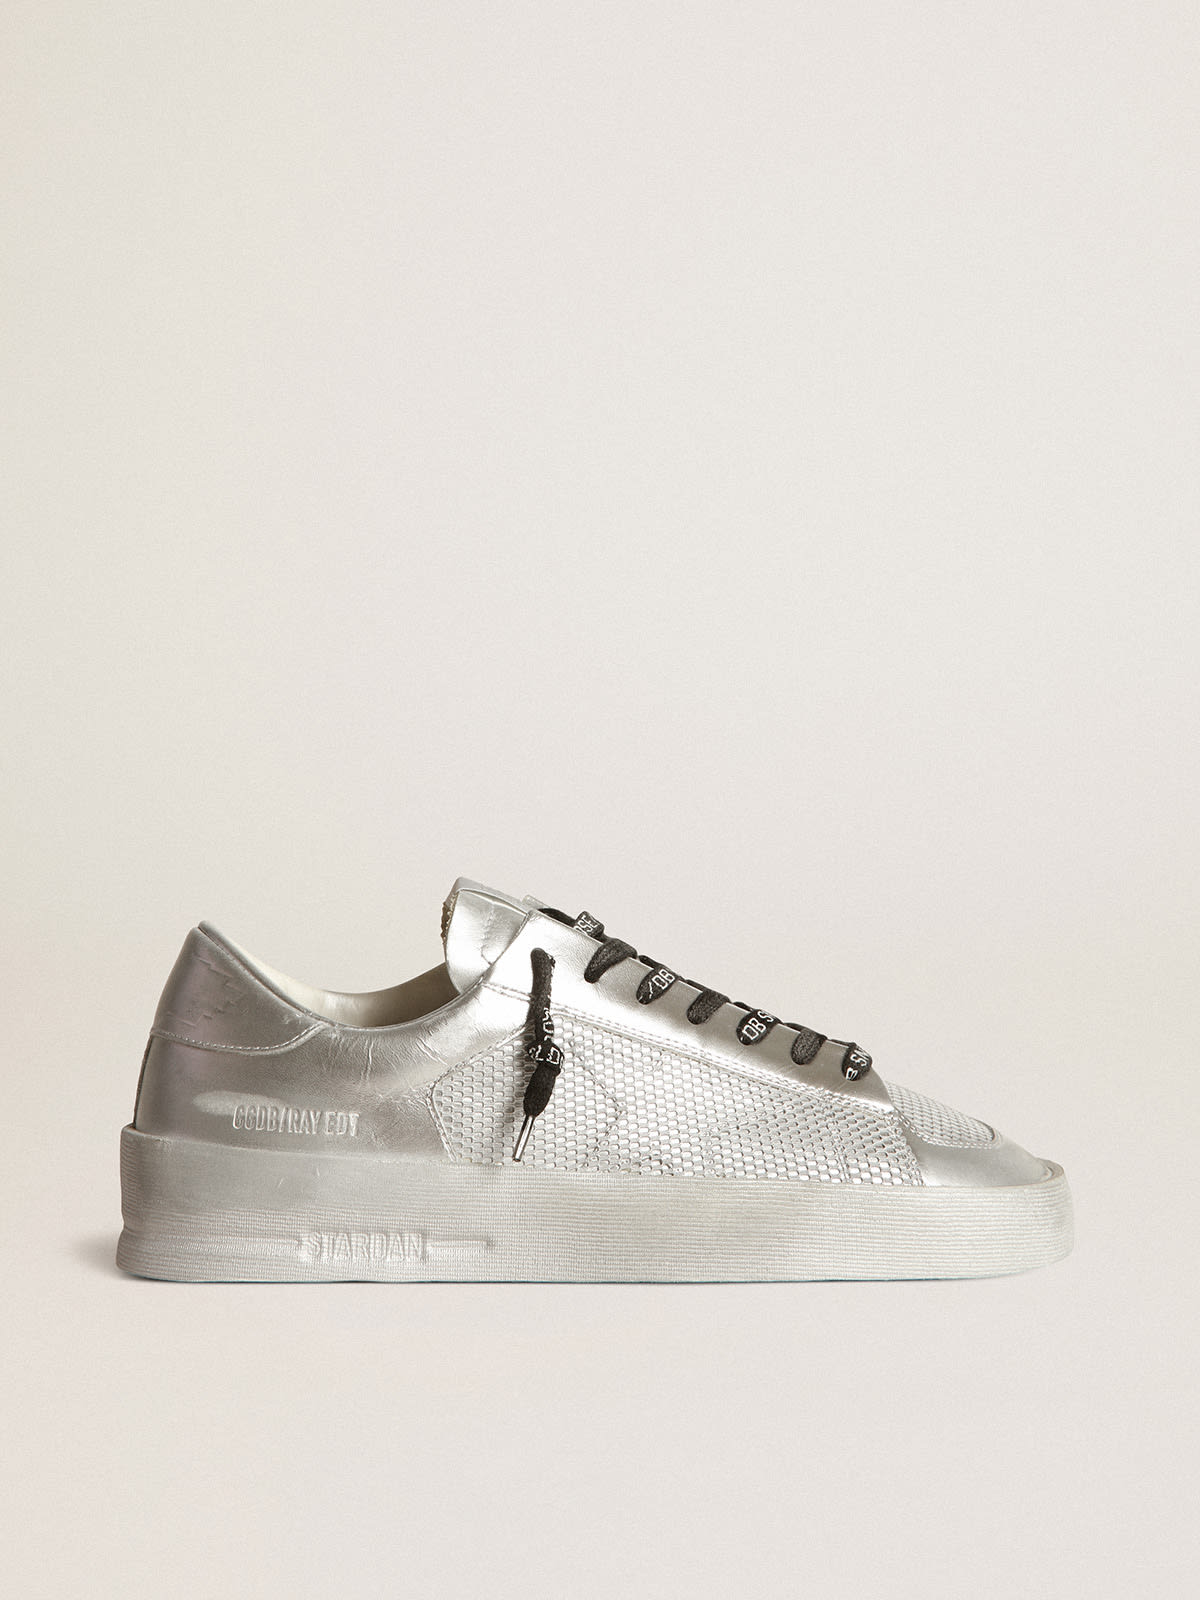 Golden Goose - Stardan sneakers in laminated leather in 